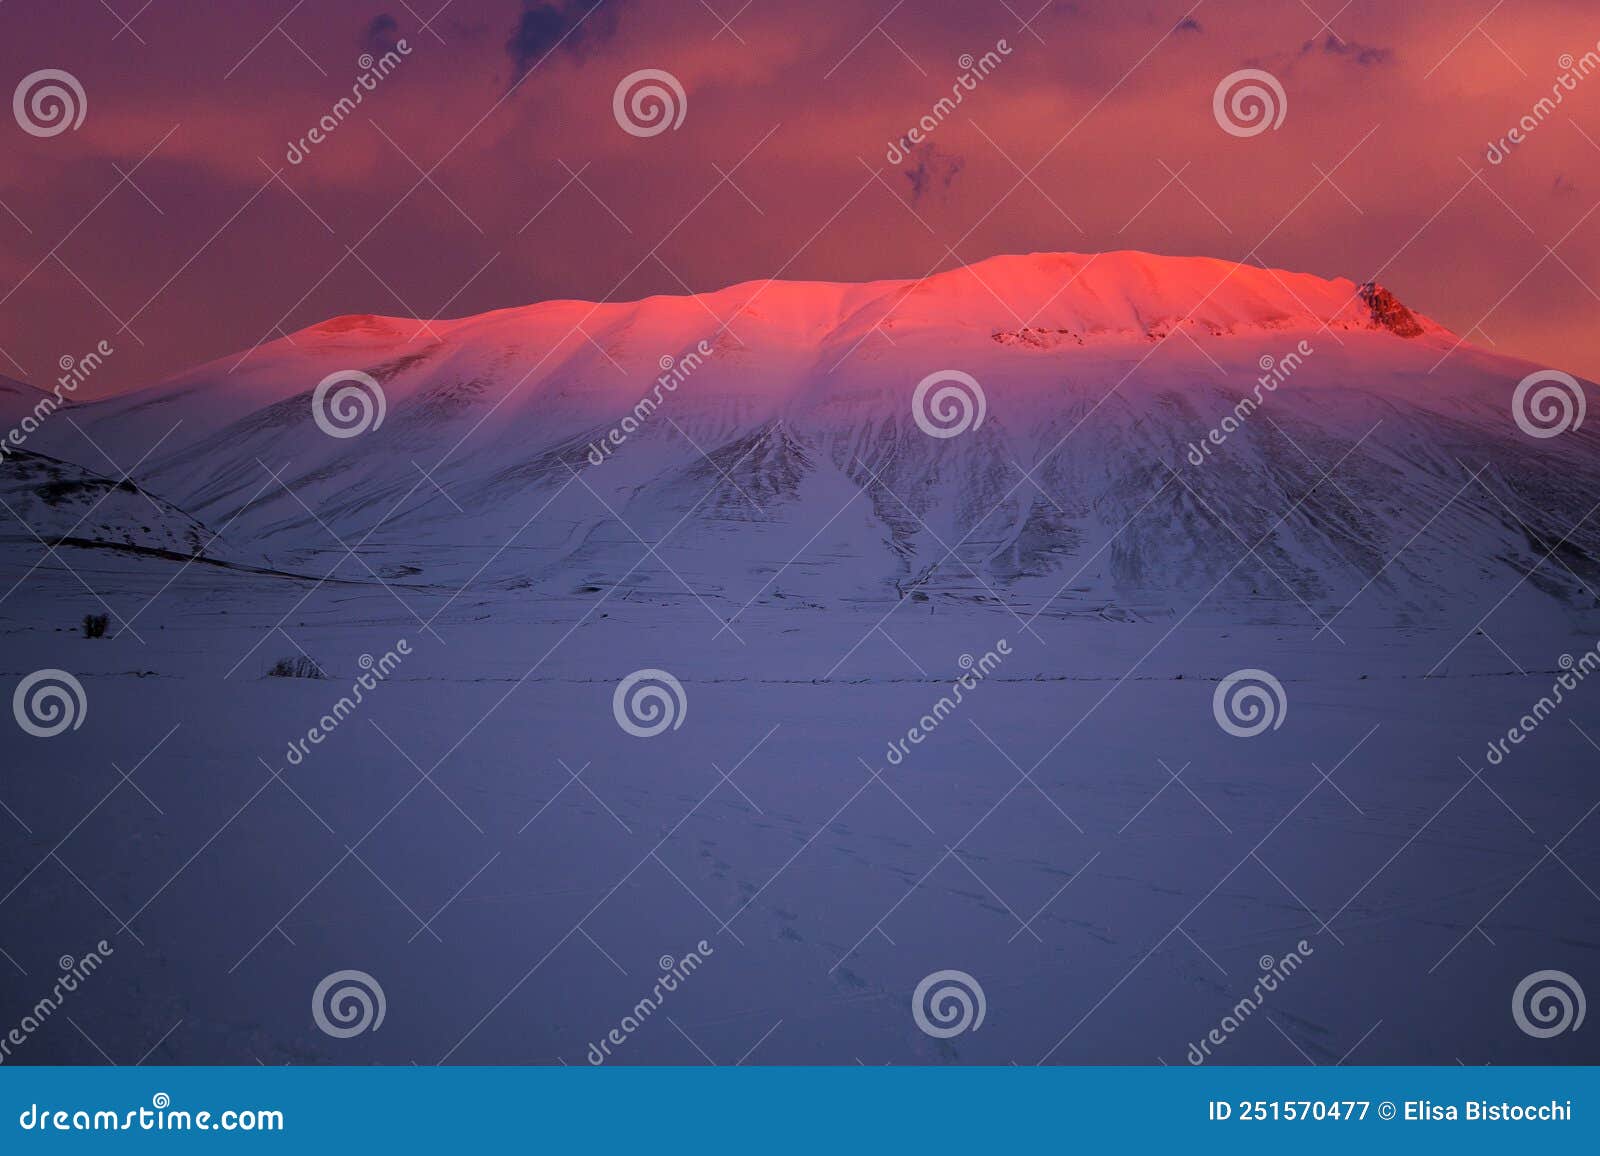 view of mount vettore during winter sunset in umbria